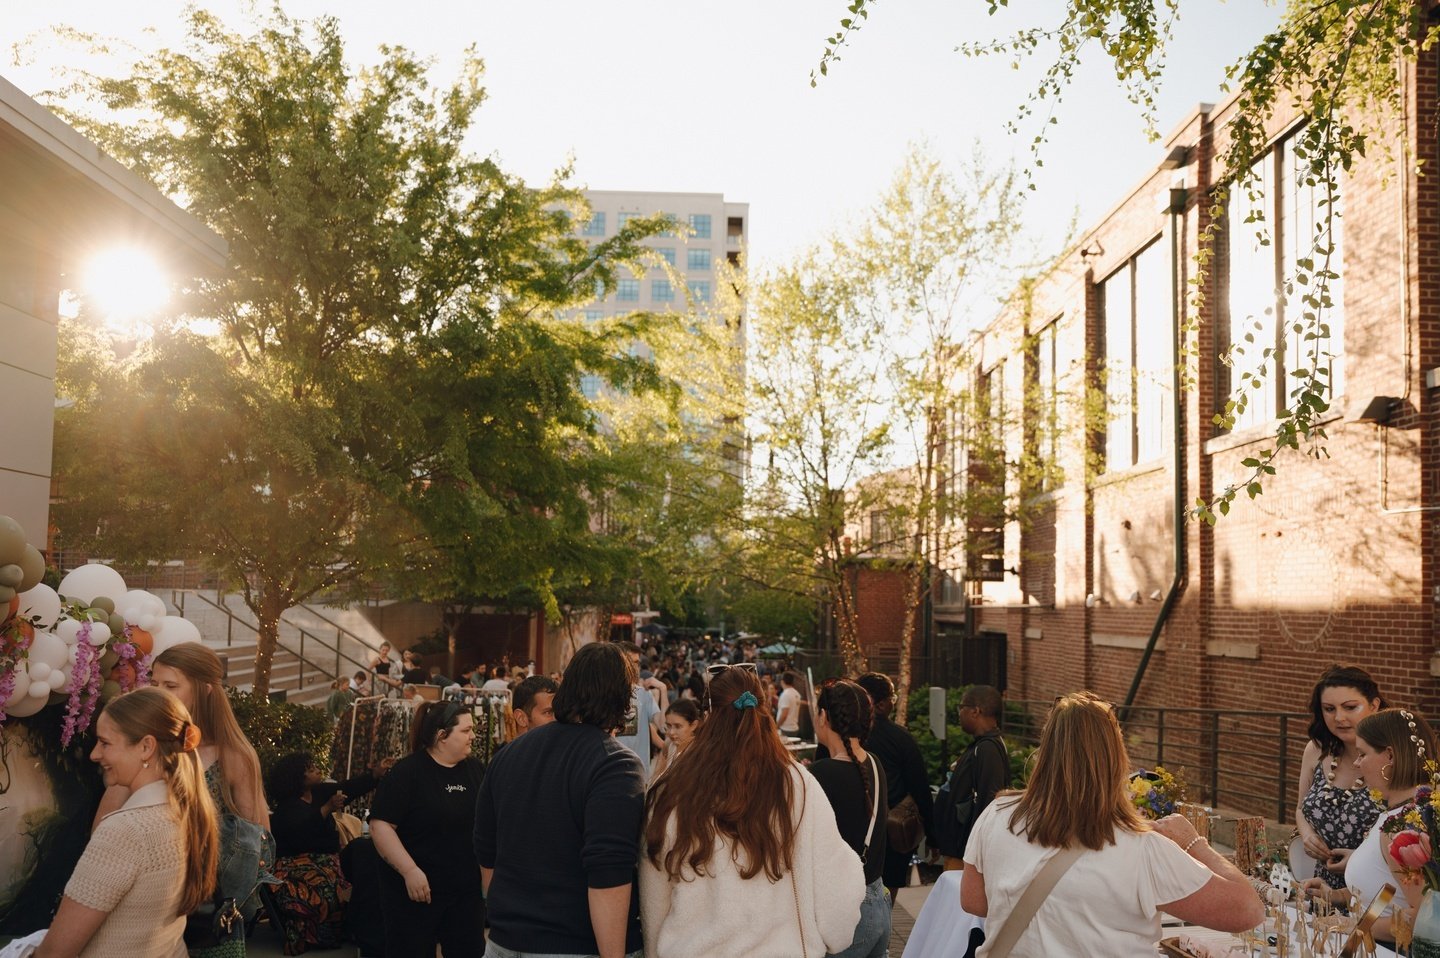 If you're looking to expand your customer base, might we suggest applying for @nebelsalleynightmarket ✨

The amount of Charlotteans who stumble upon this event as they're out and about for their Saturday in the city makes up a decent chunk of the foo